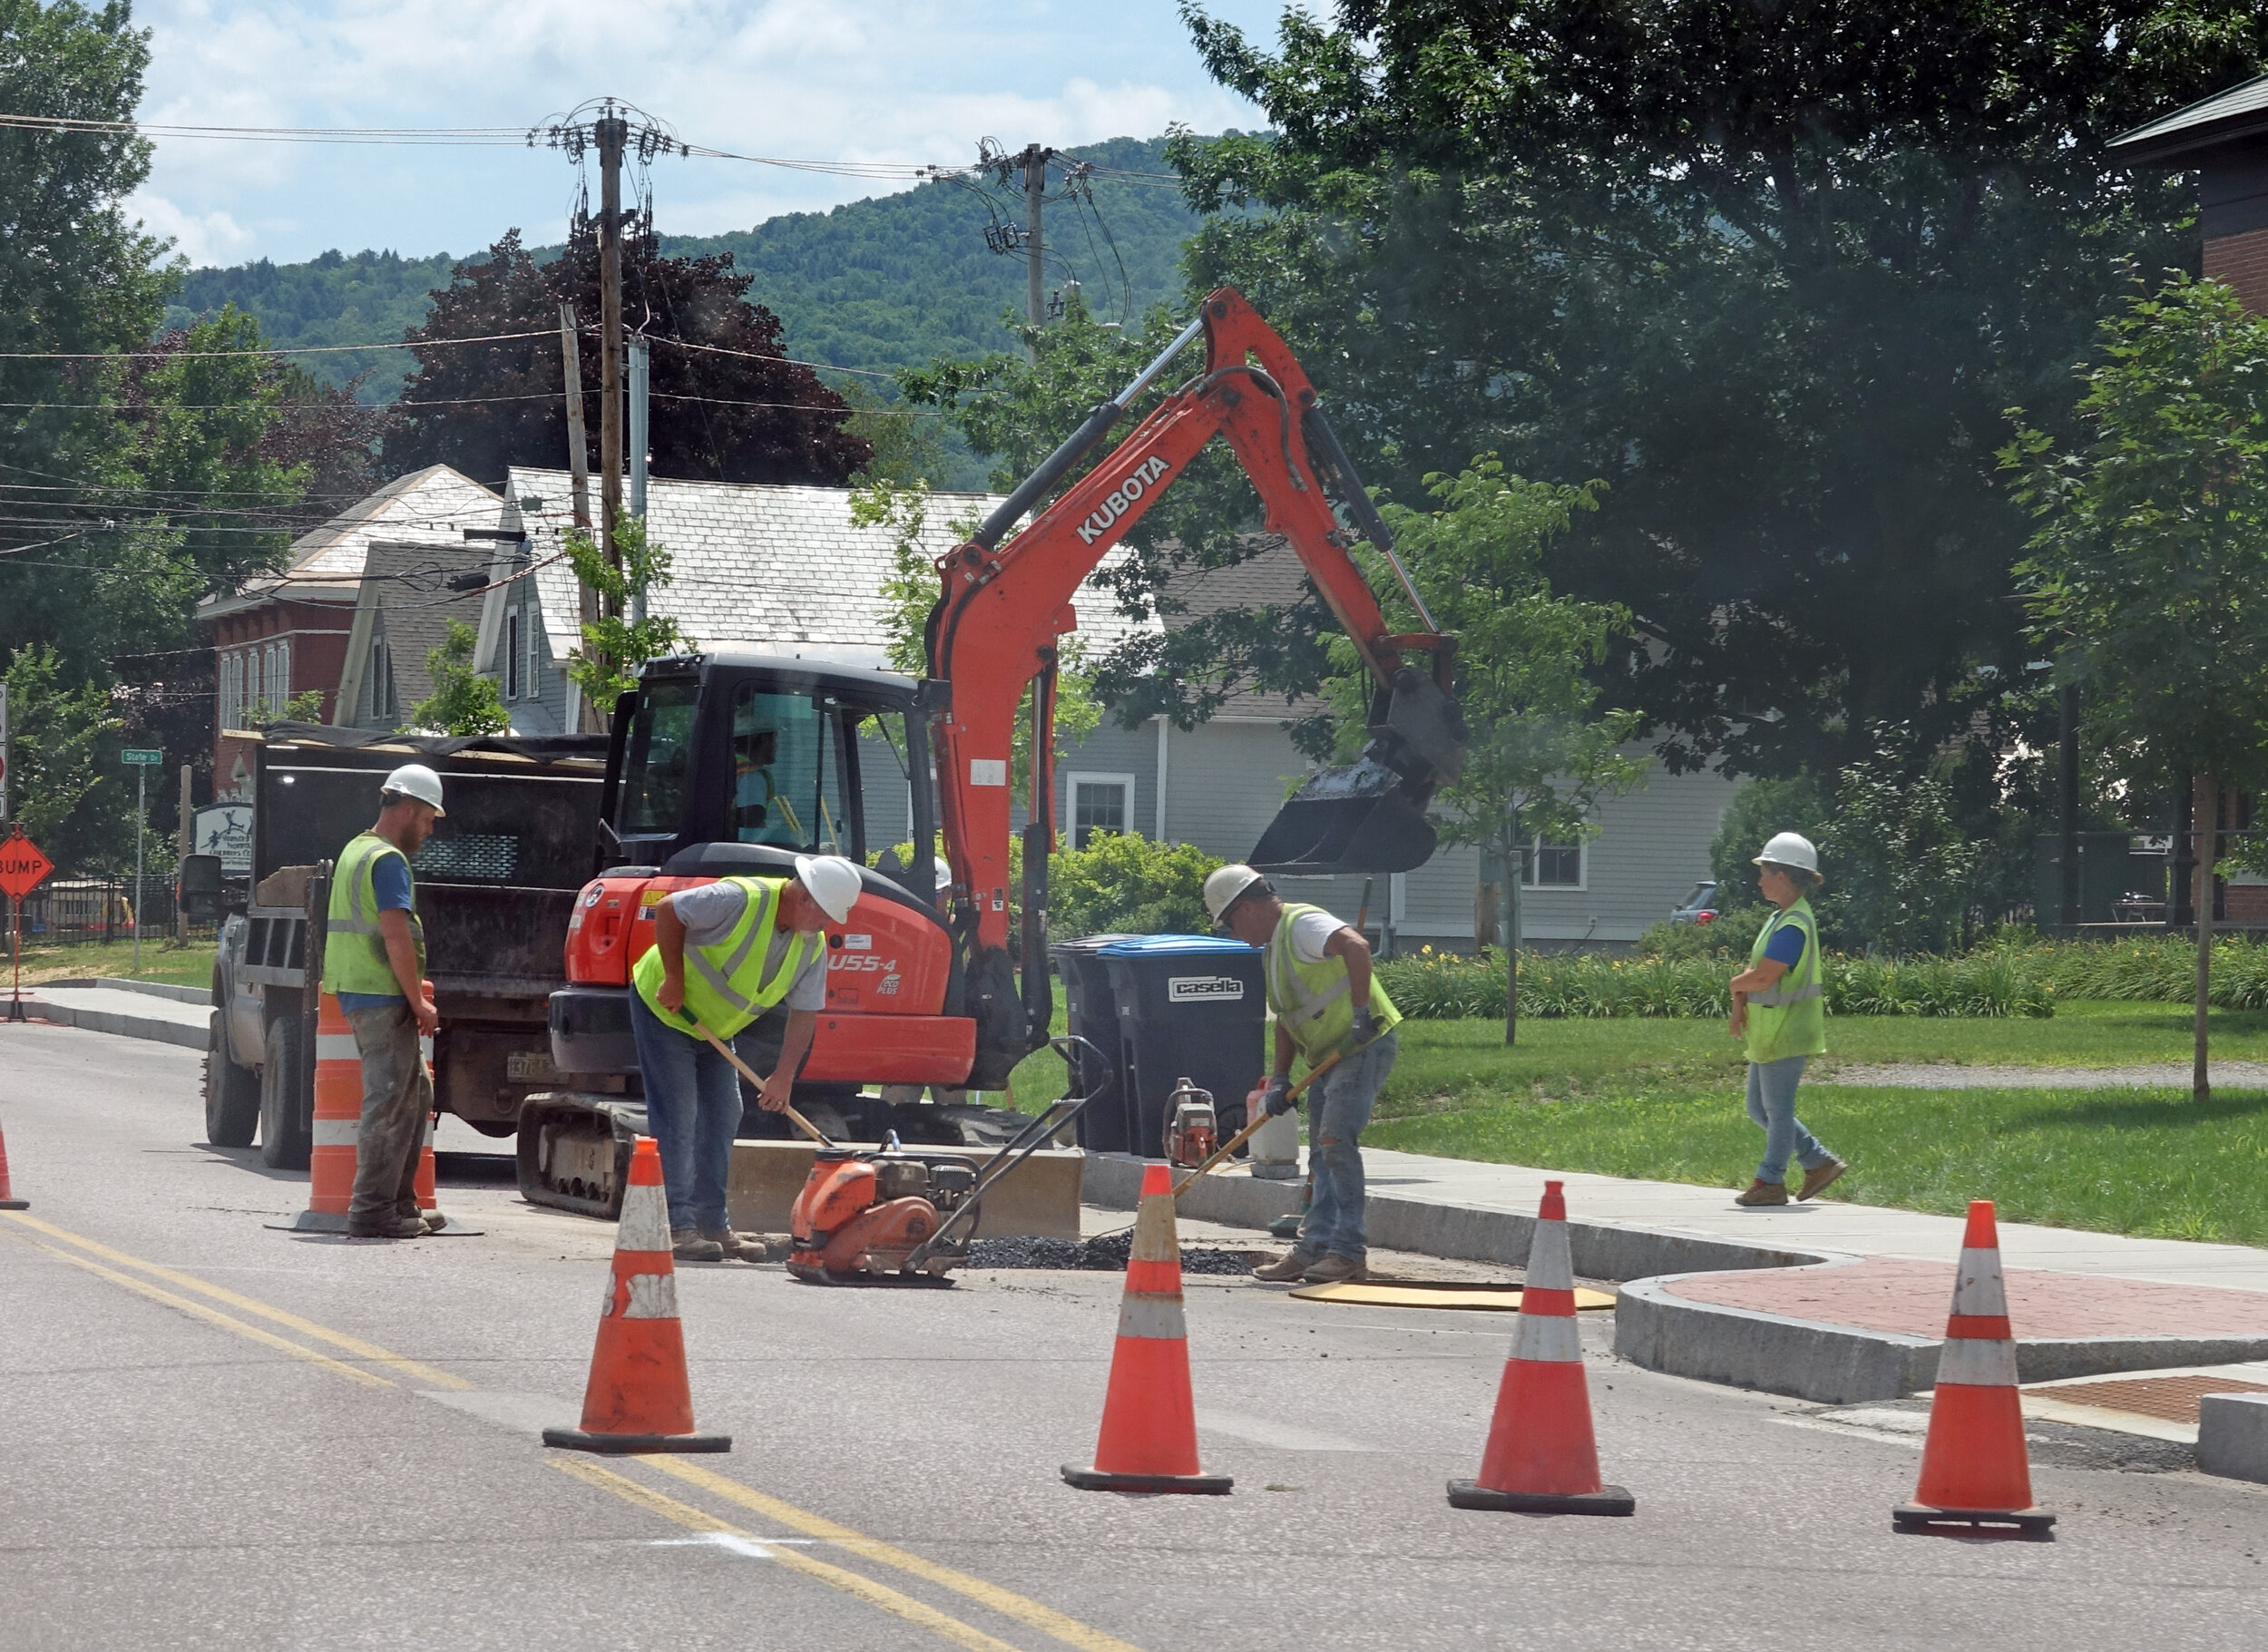   On South Main Street, workers make final adjustments to drains and other surface structures in the roadway before the final paving work commences. Photo by Gordon Miller  